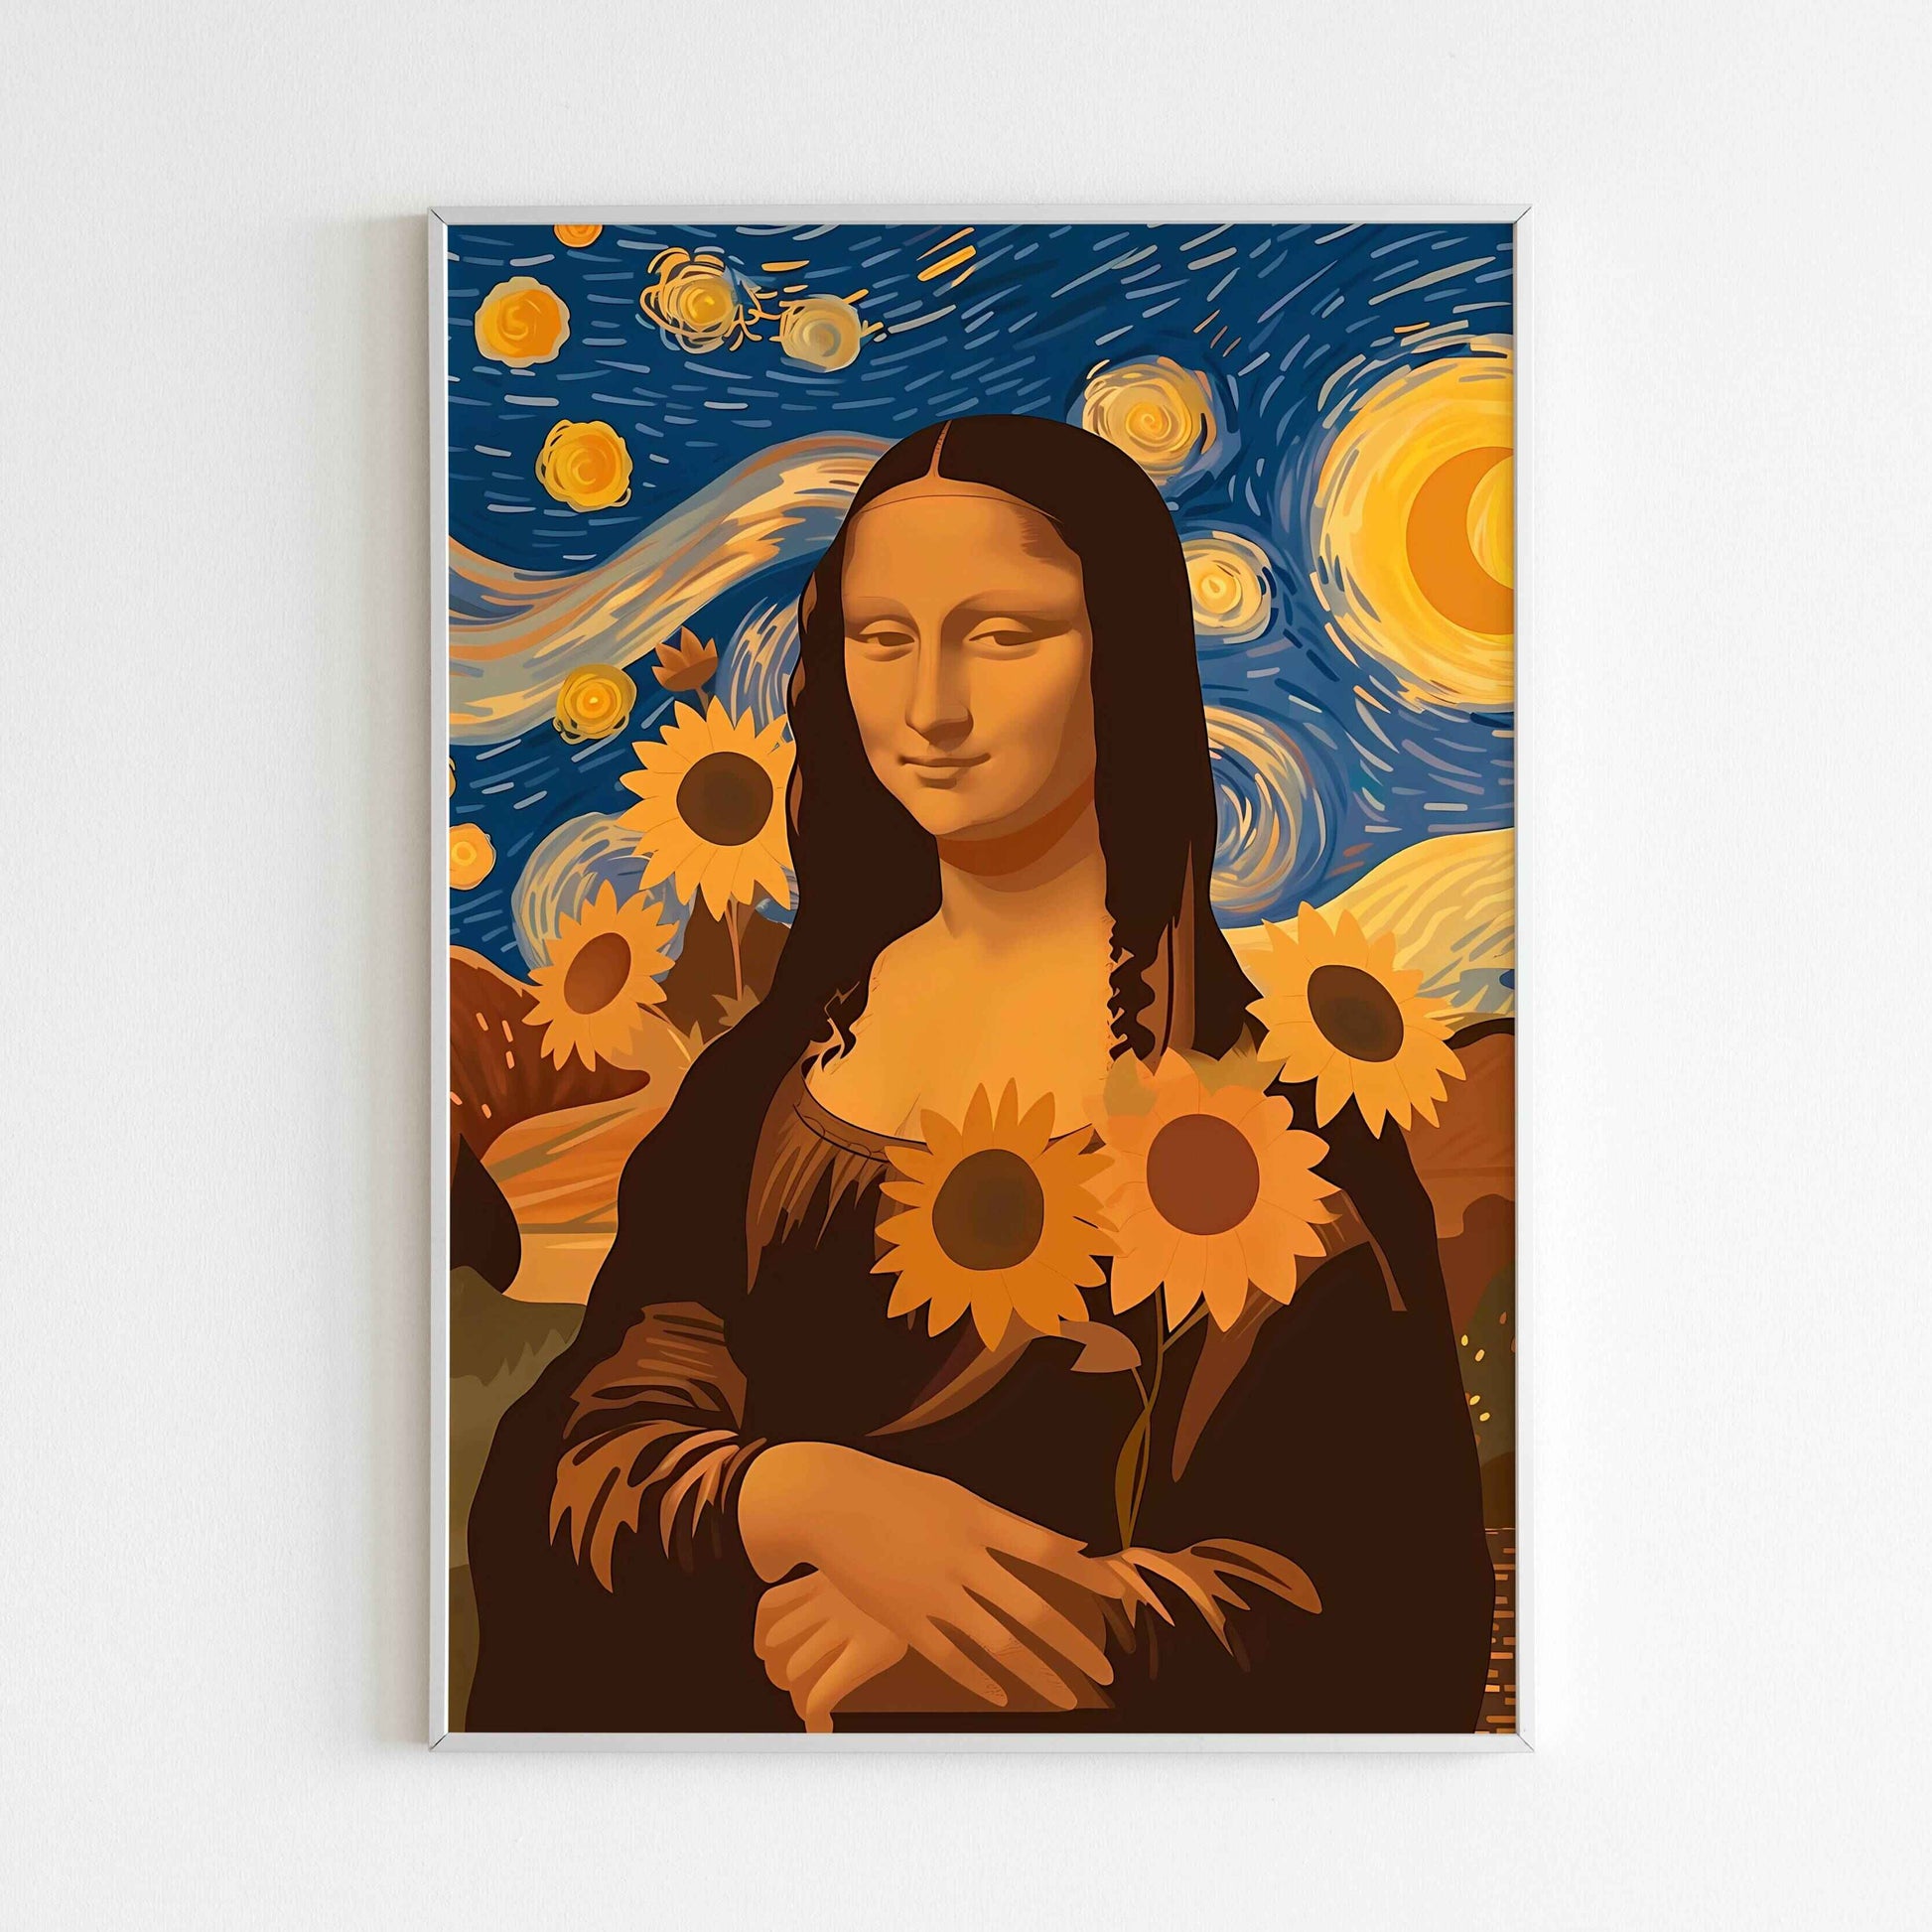 Experience the artistic fusion of Van Gogh and Mona Lisa with this printable poster (physical or digital).